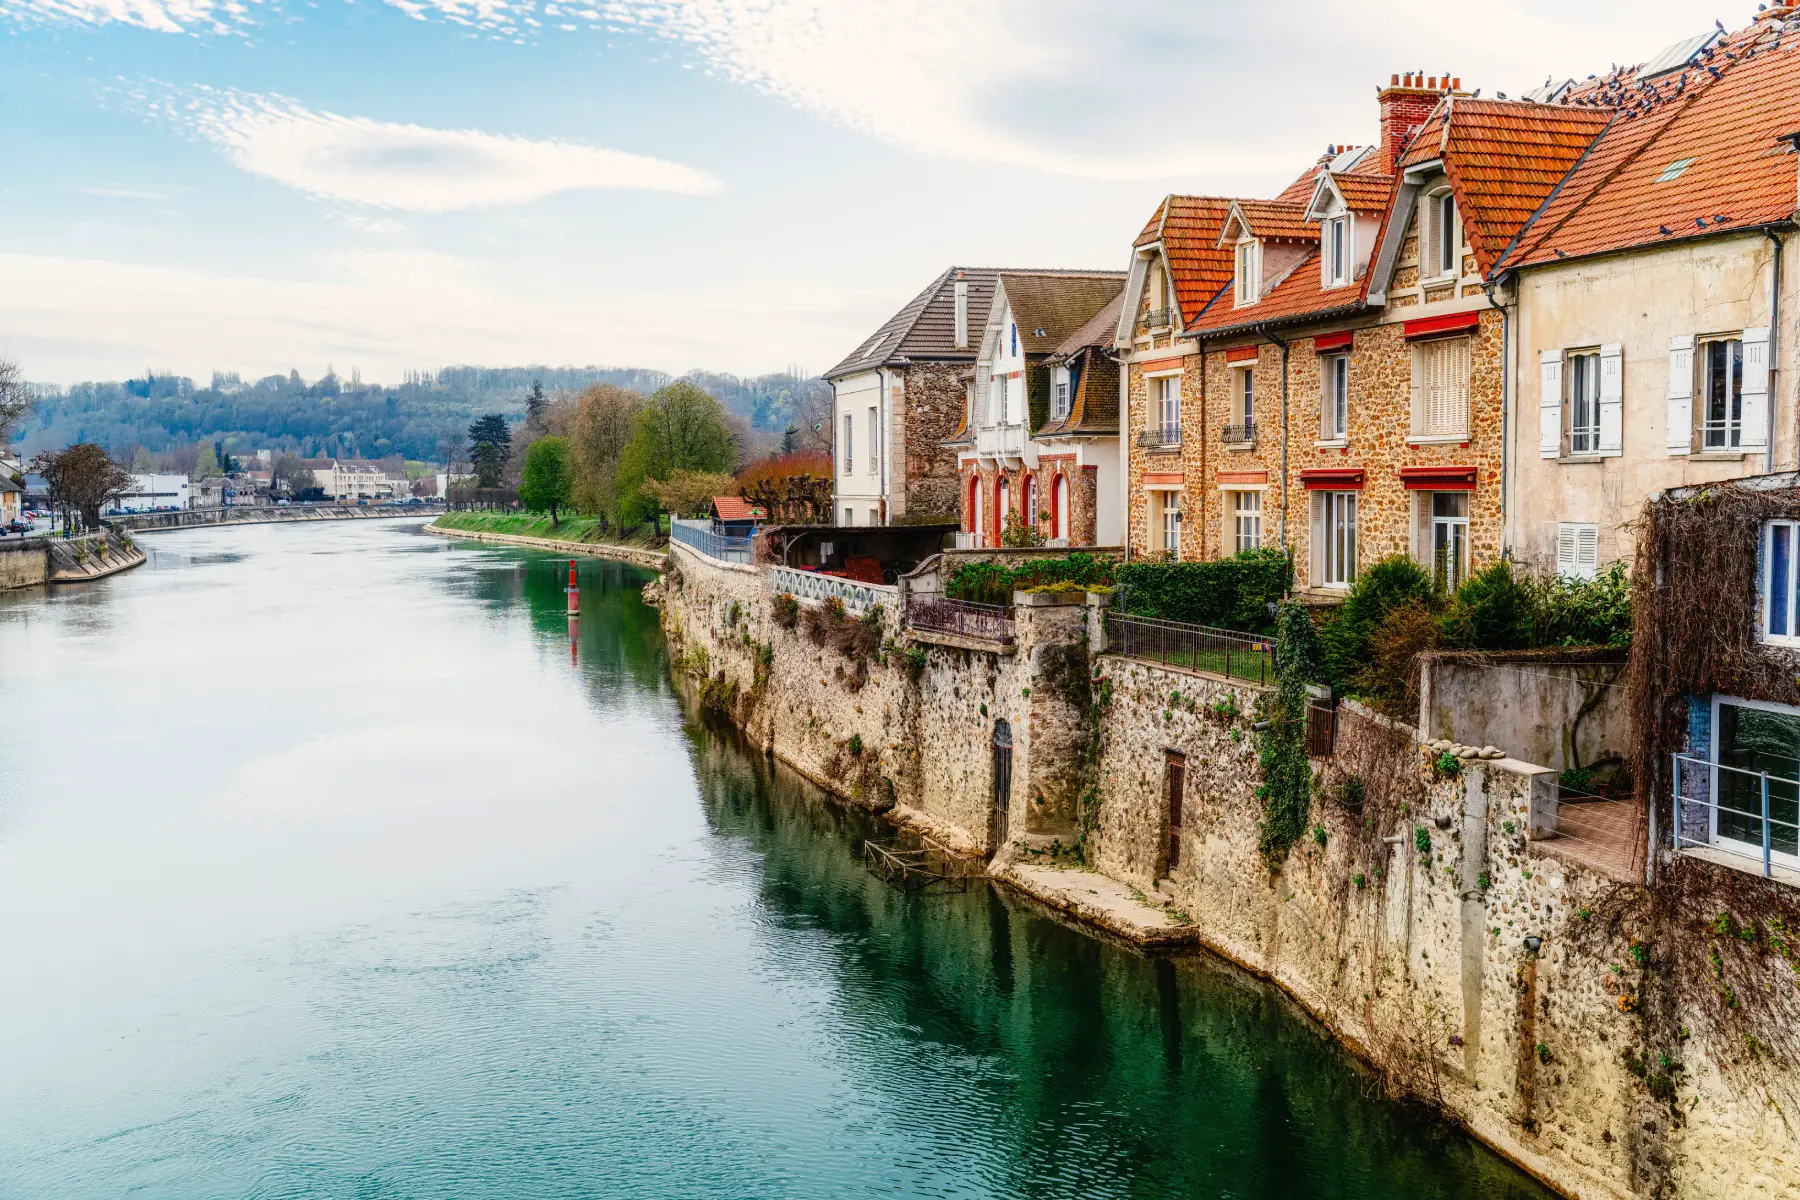 pretty houses along the Marne River in the village of La Ferte sous Jouarre, in the Seine-et-Marne district of France